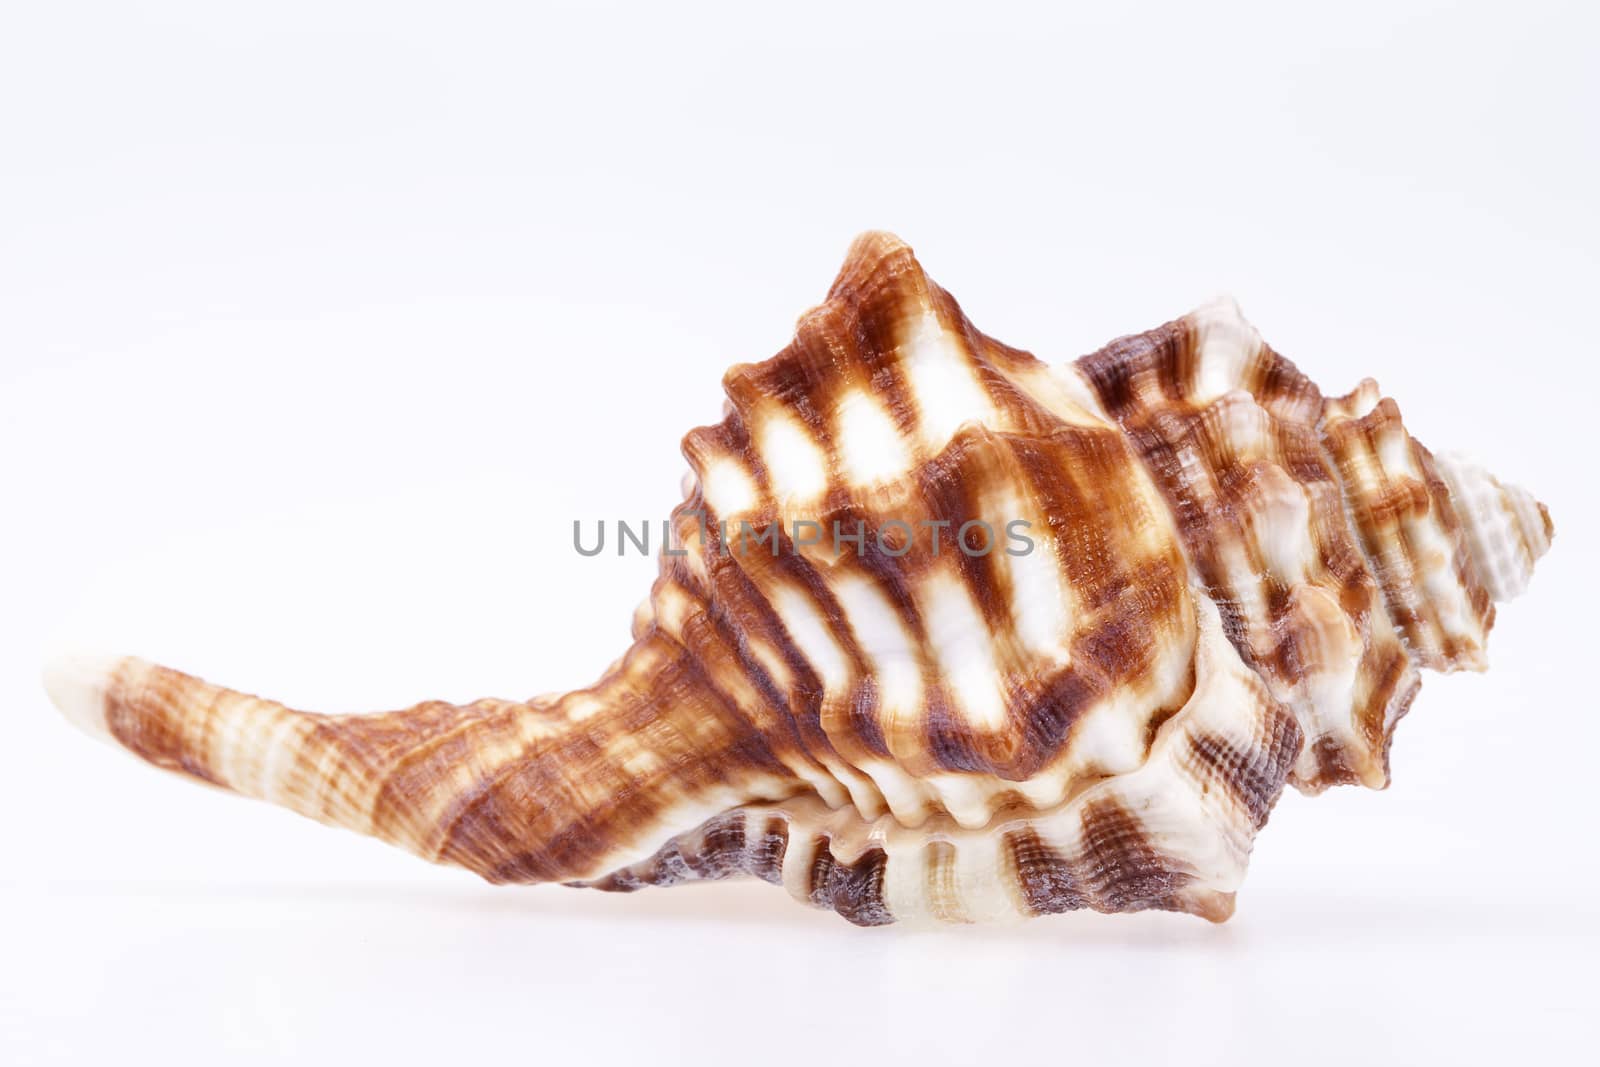 Seashell of horse conch isolated on white background by mychadre77